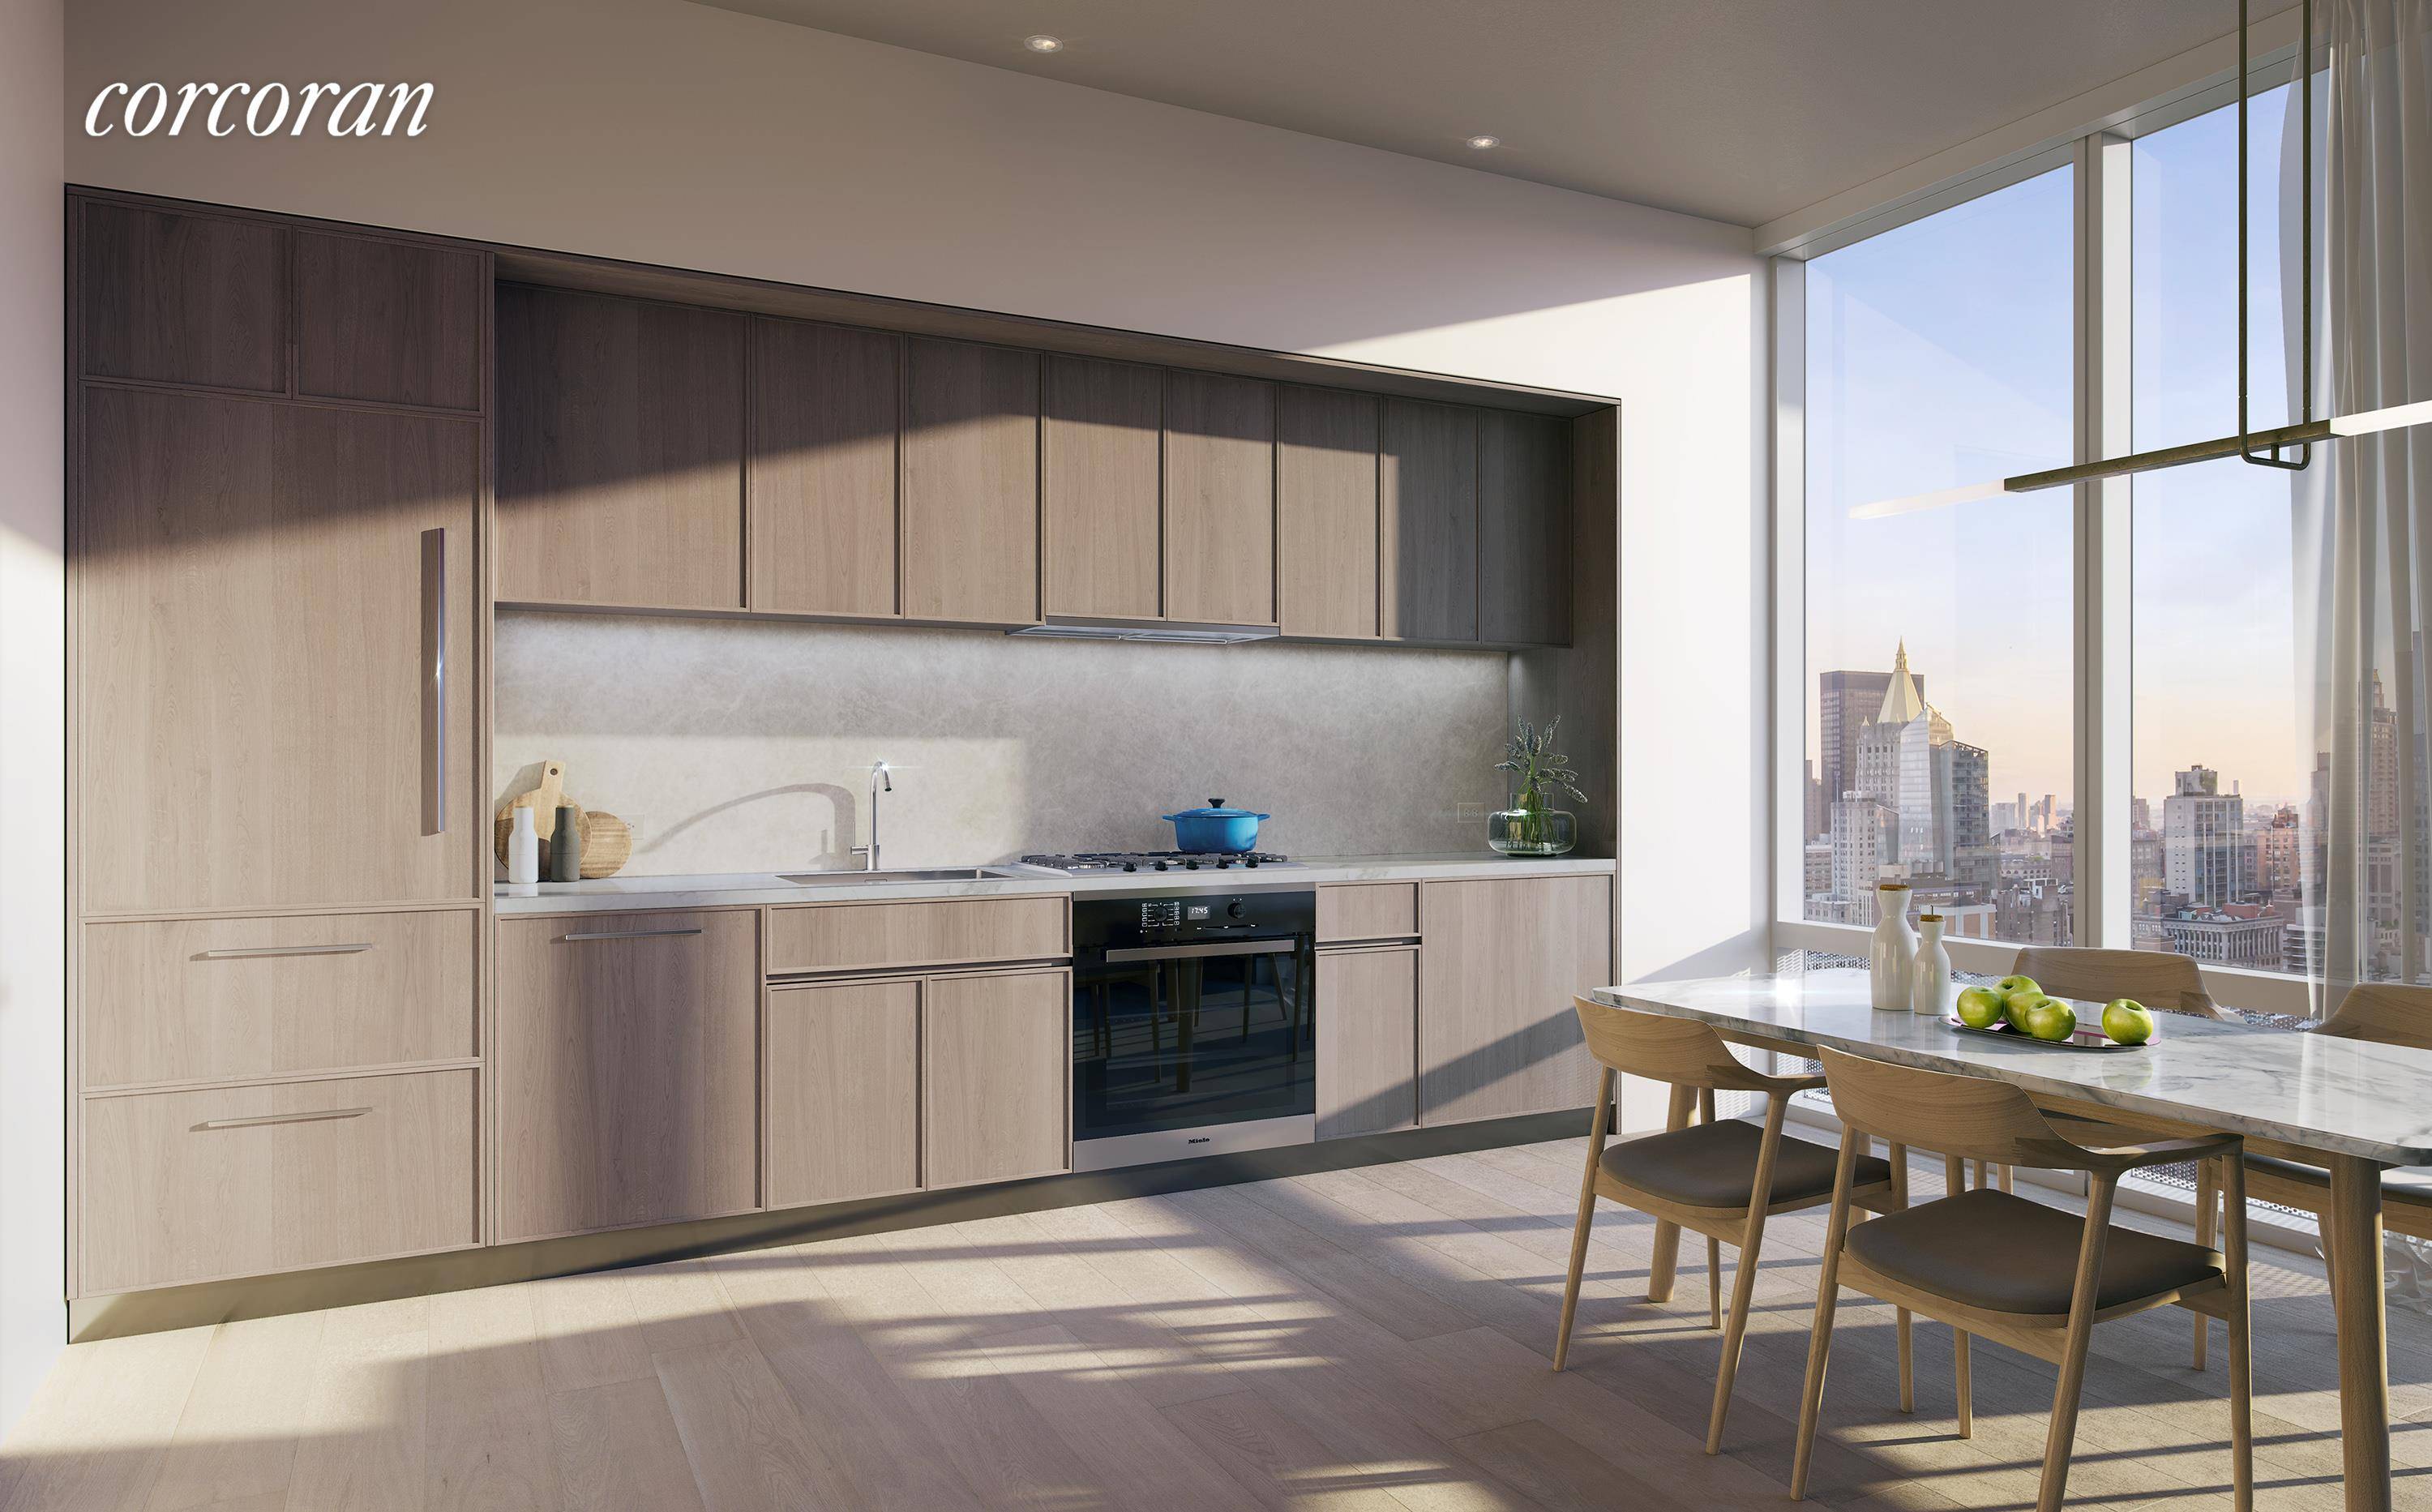 Wraparound, floor to ceiling, sound attenuated windows feature views of the East River and City skyline from the North East exposure of this 723 square foot 67.